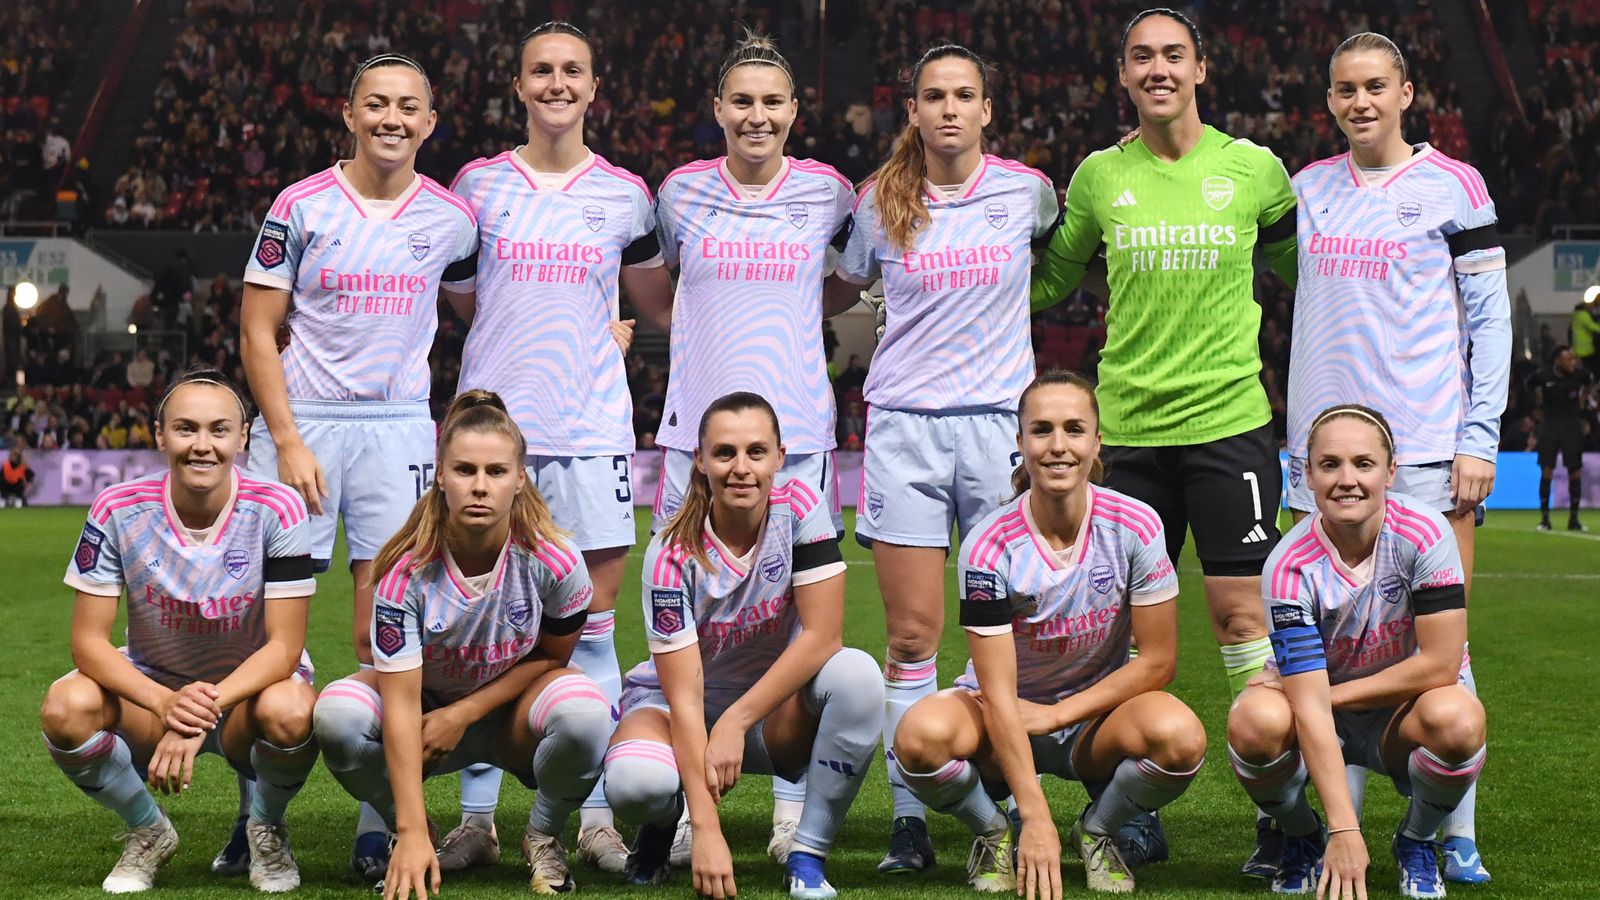 Arsenal Women acknowledge lack of diversity in team photo | Football News